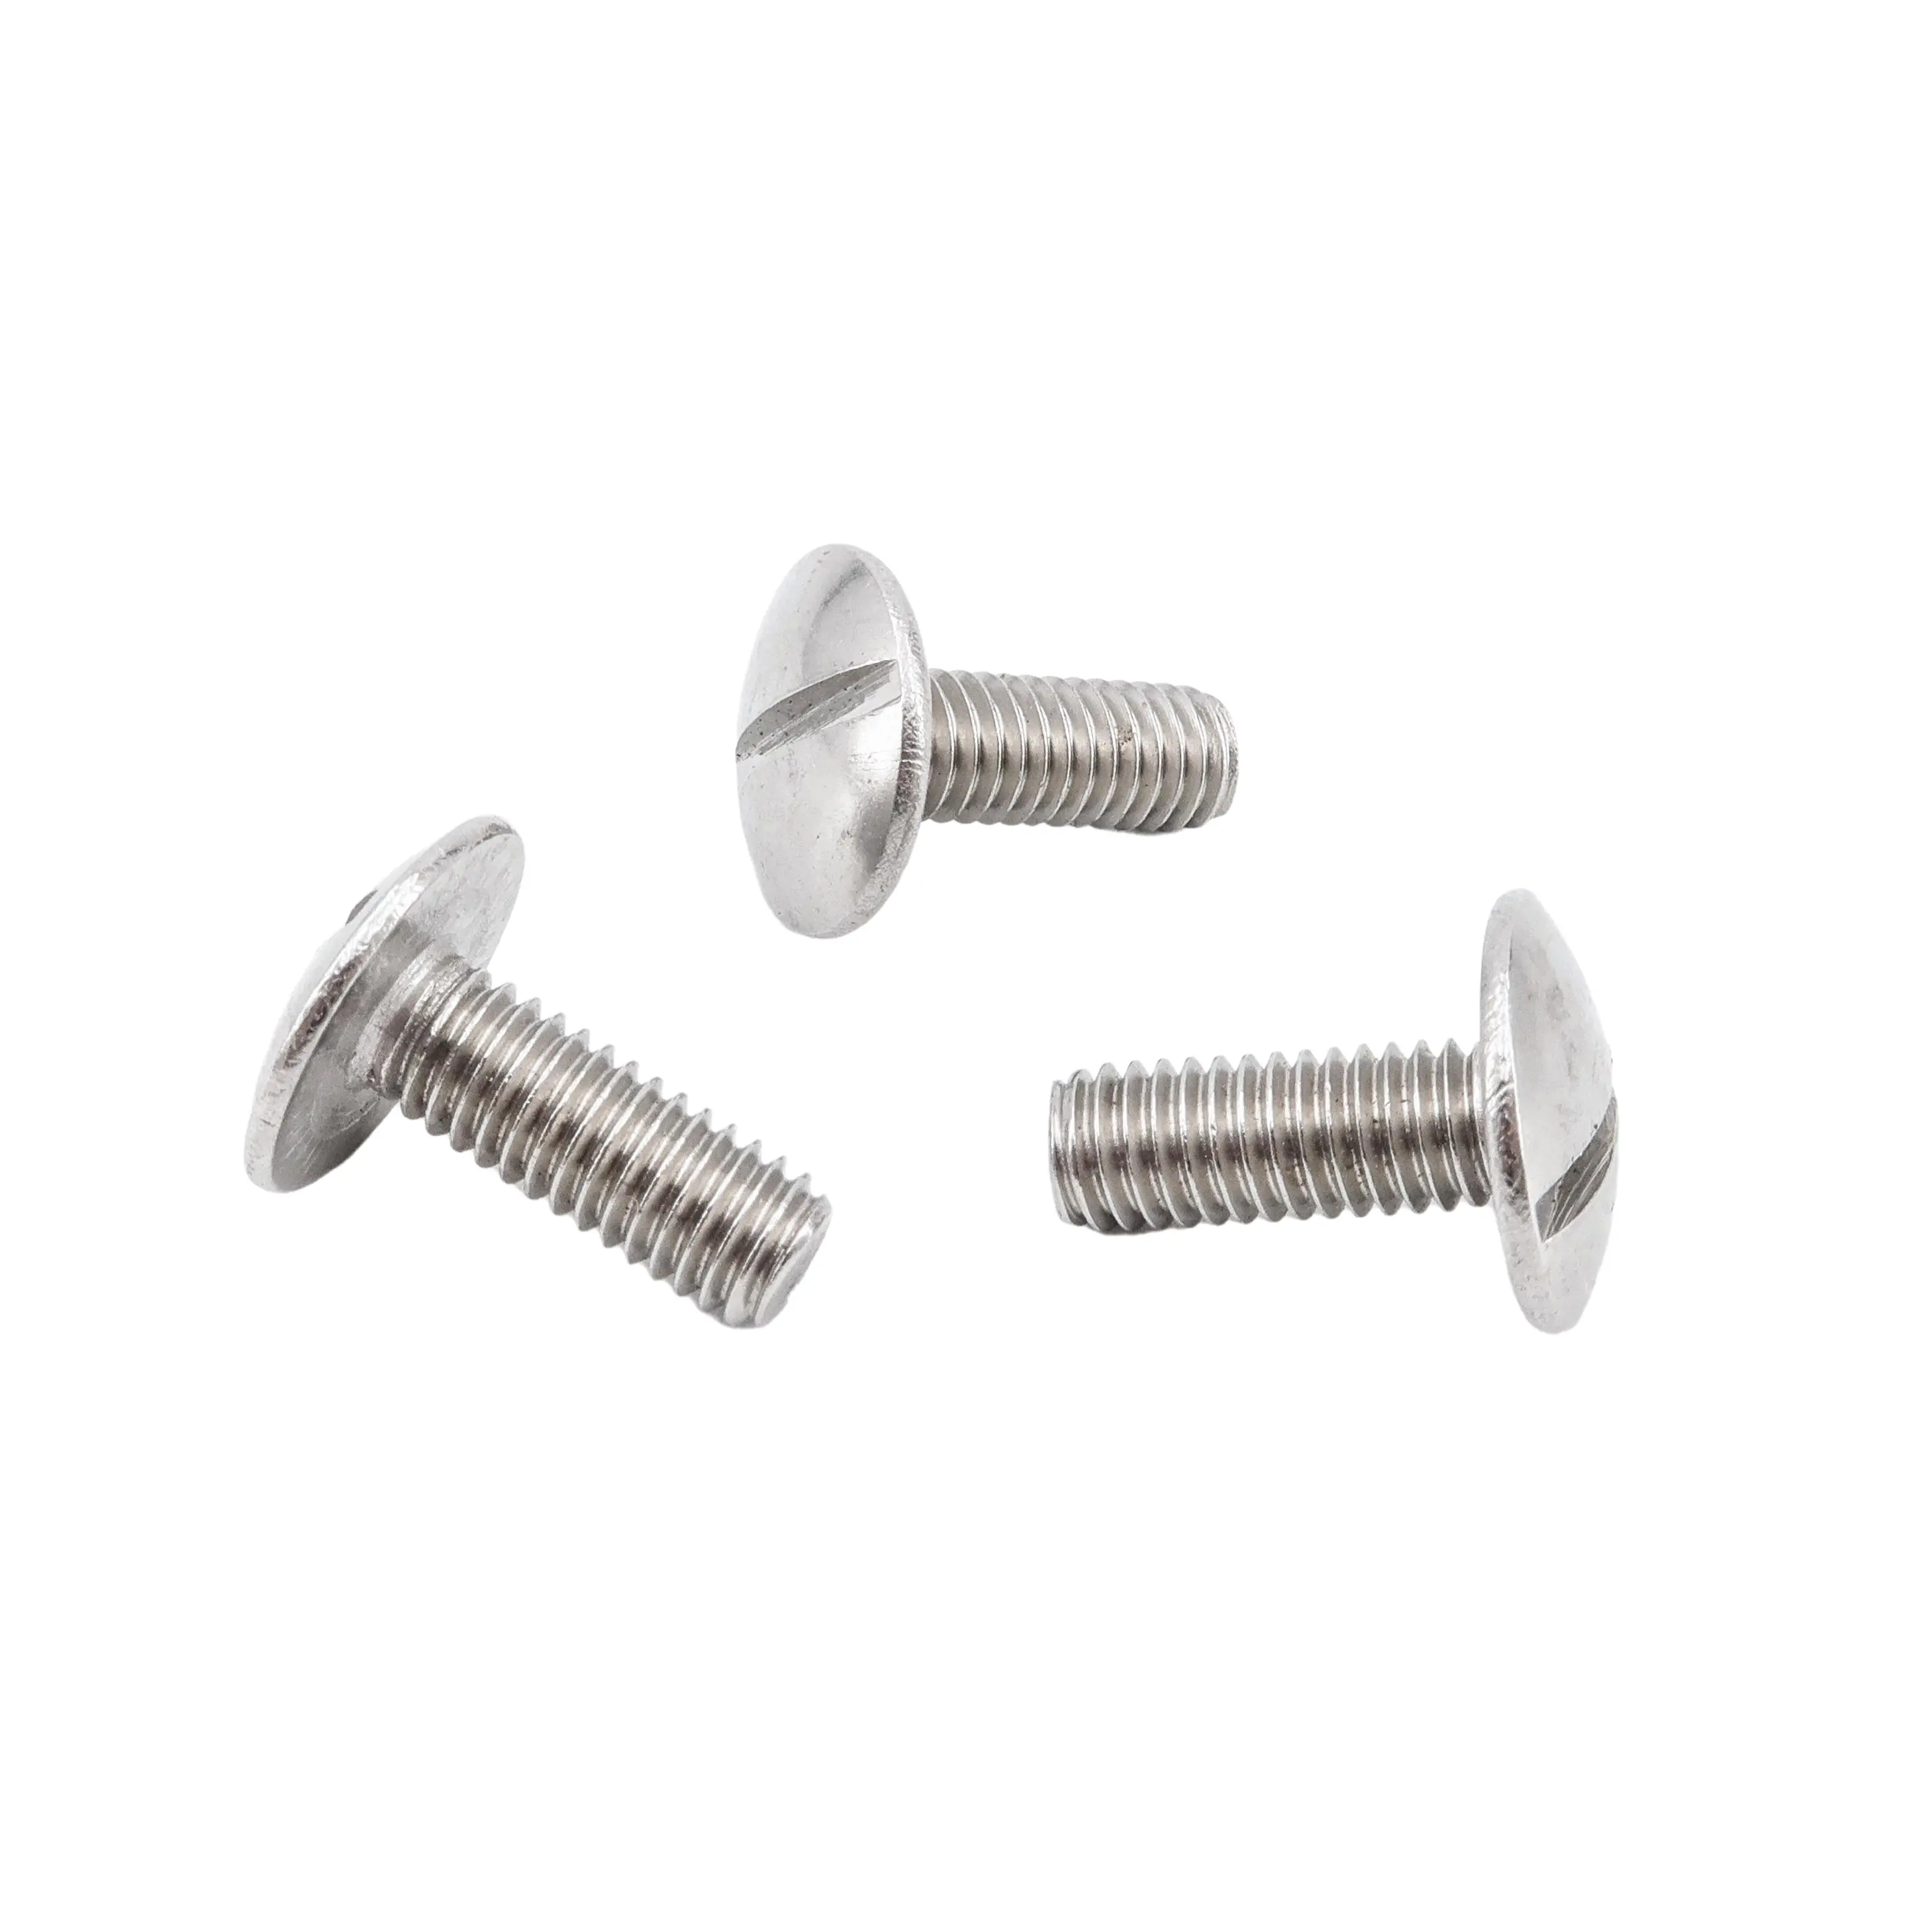 Factory Direct Sales Sell Well Corrosion Resistant DIN964 ISO2010 SLOTTED PAN HEAD MACHINE SCREW M1.6 - M10